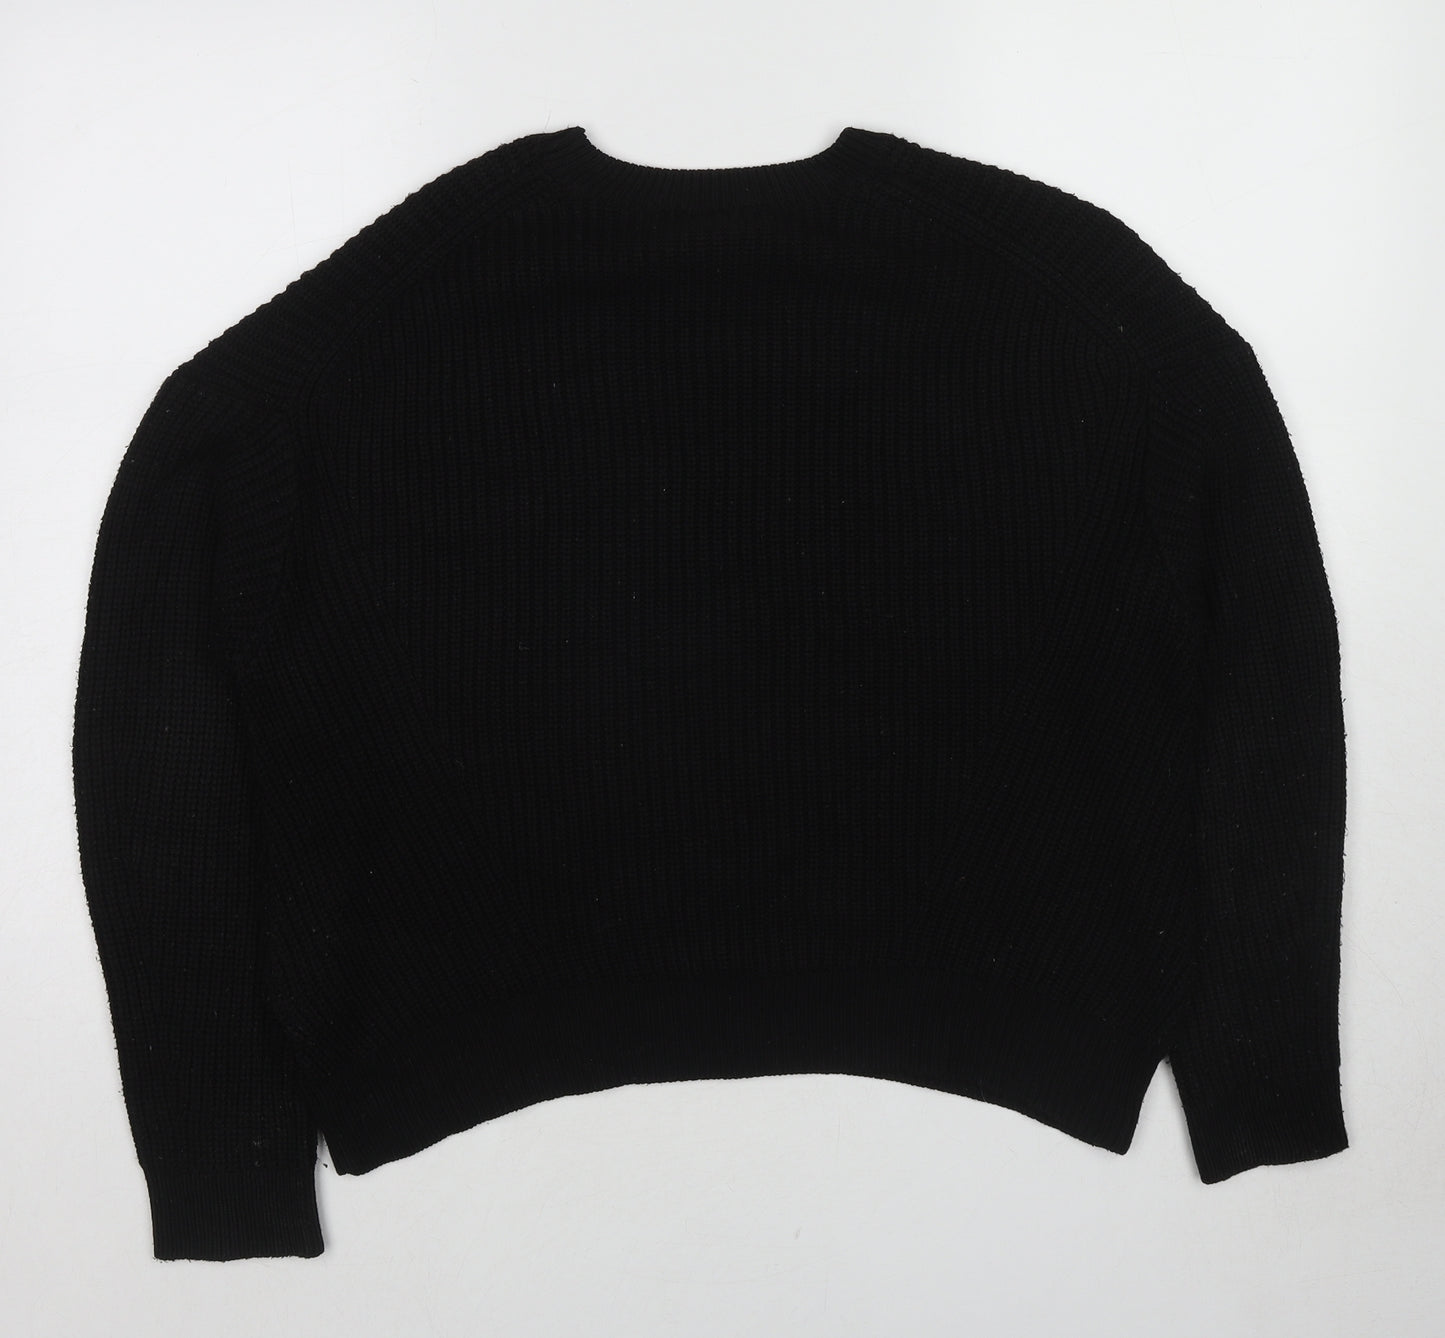 New Look Womens Black Round Neck Acrylic Pullover Jumper Size S